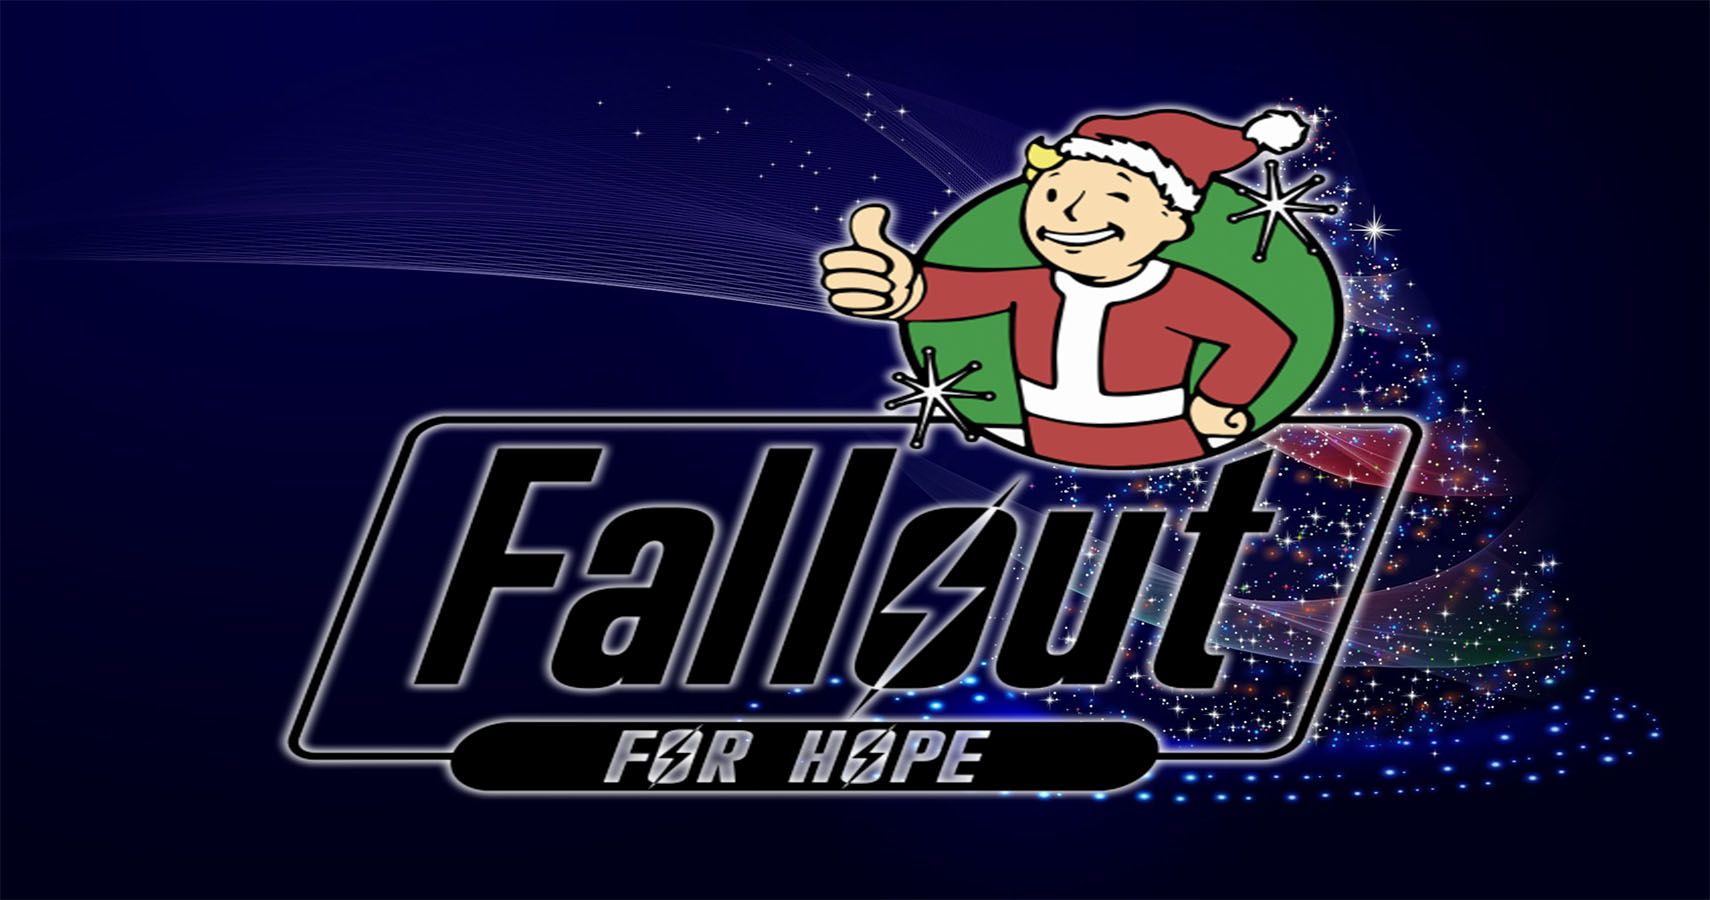 Fallout For Hope logo over stock image from Pixabay